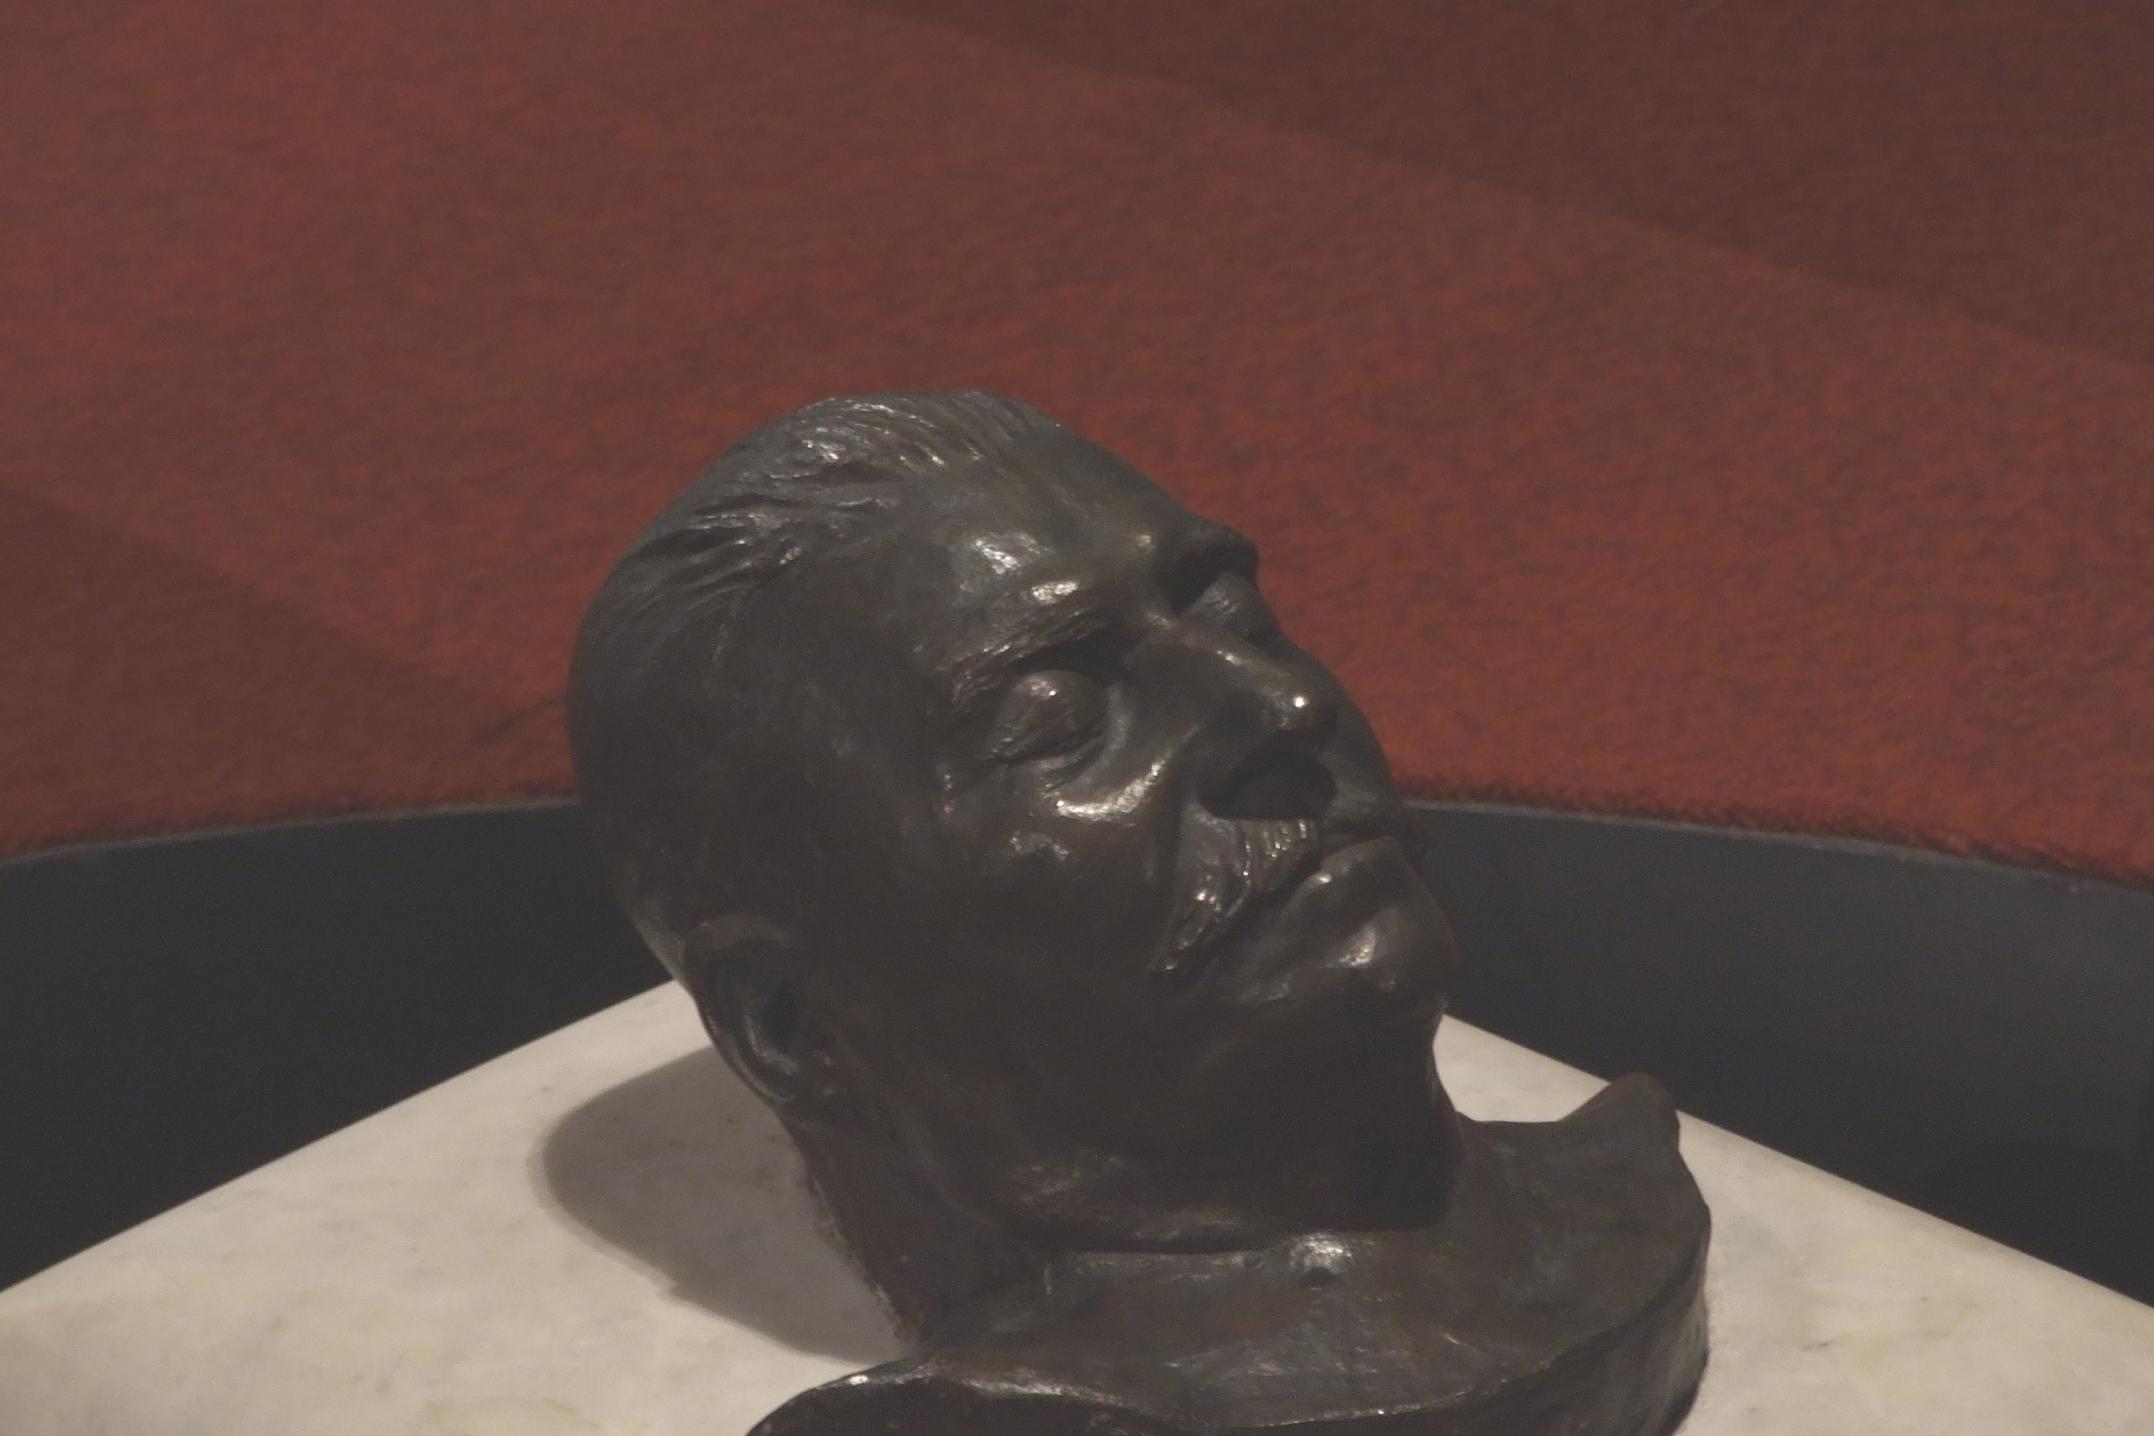 Stalin’s death mask resides in the museum